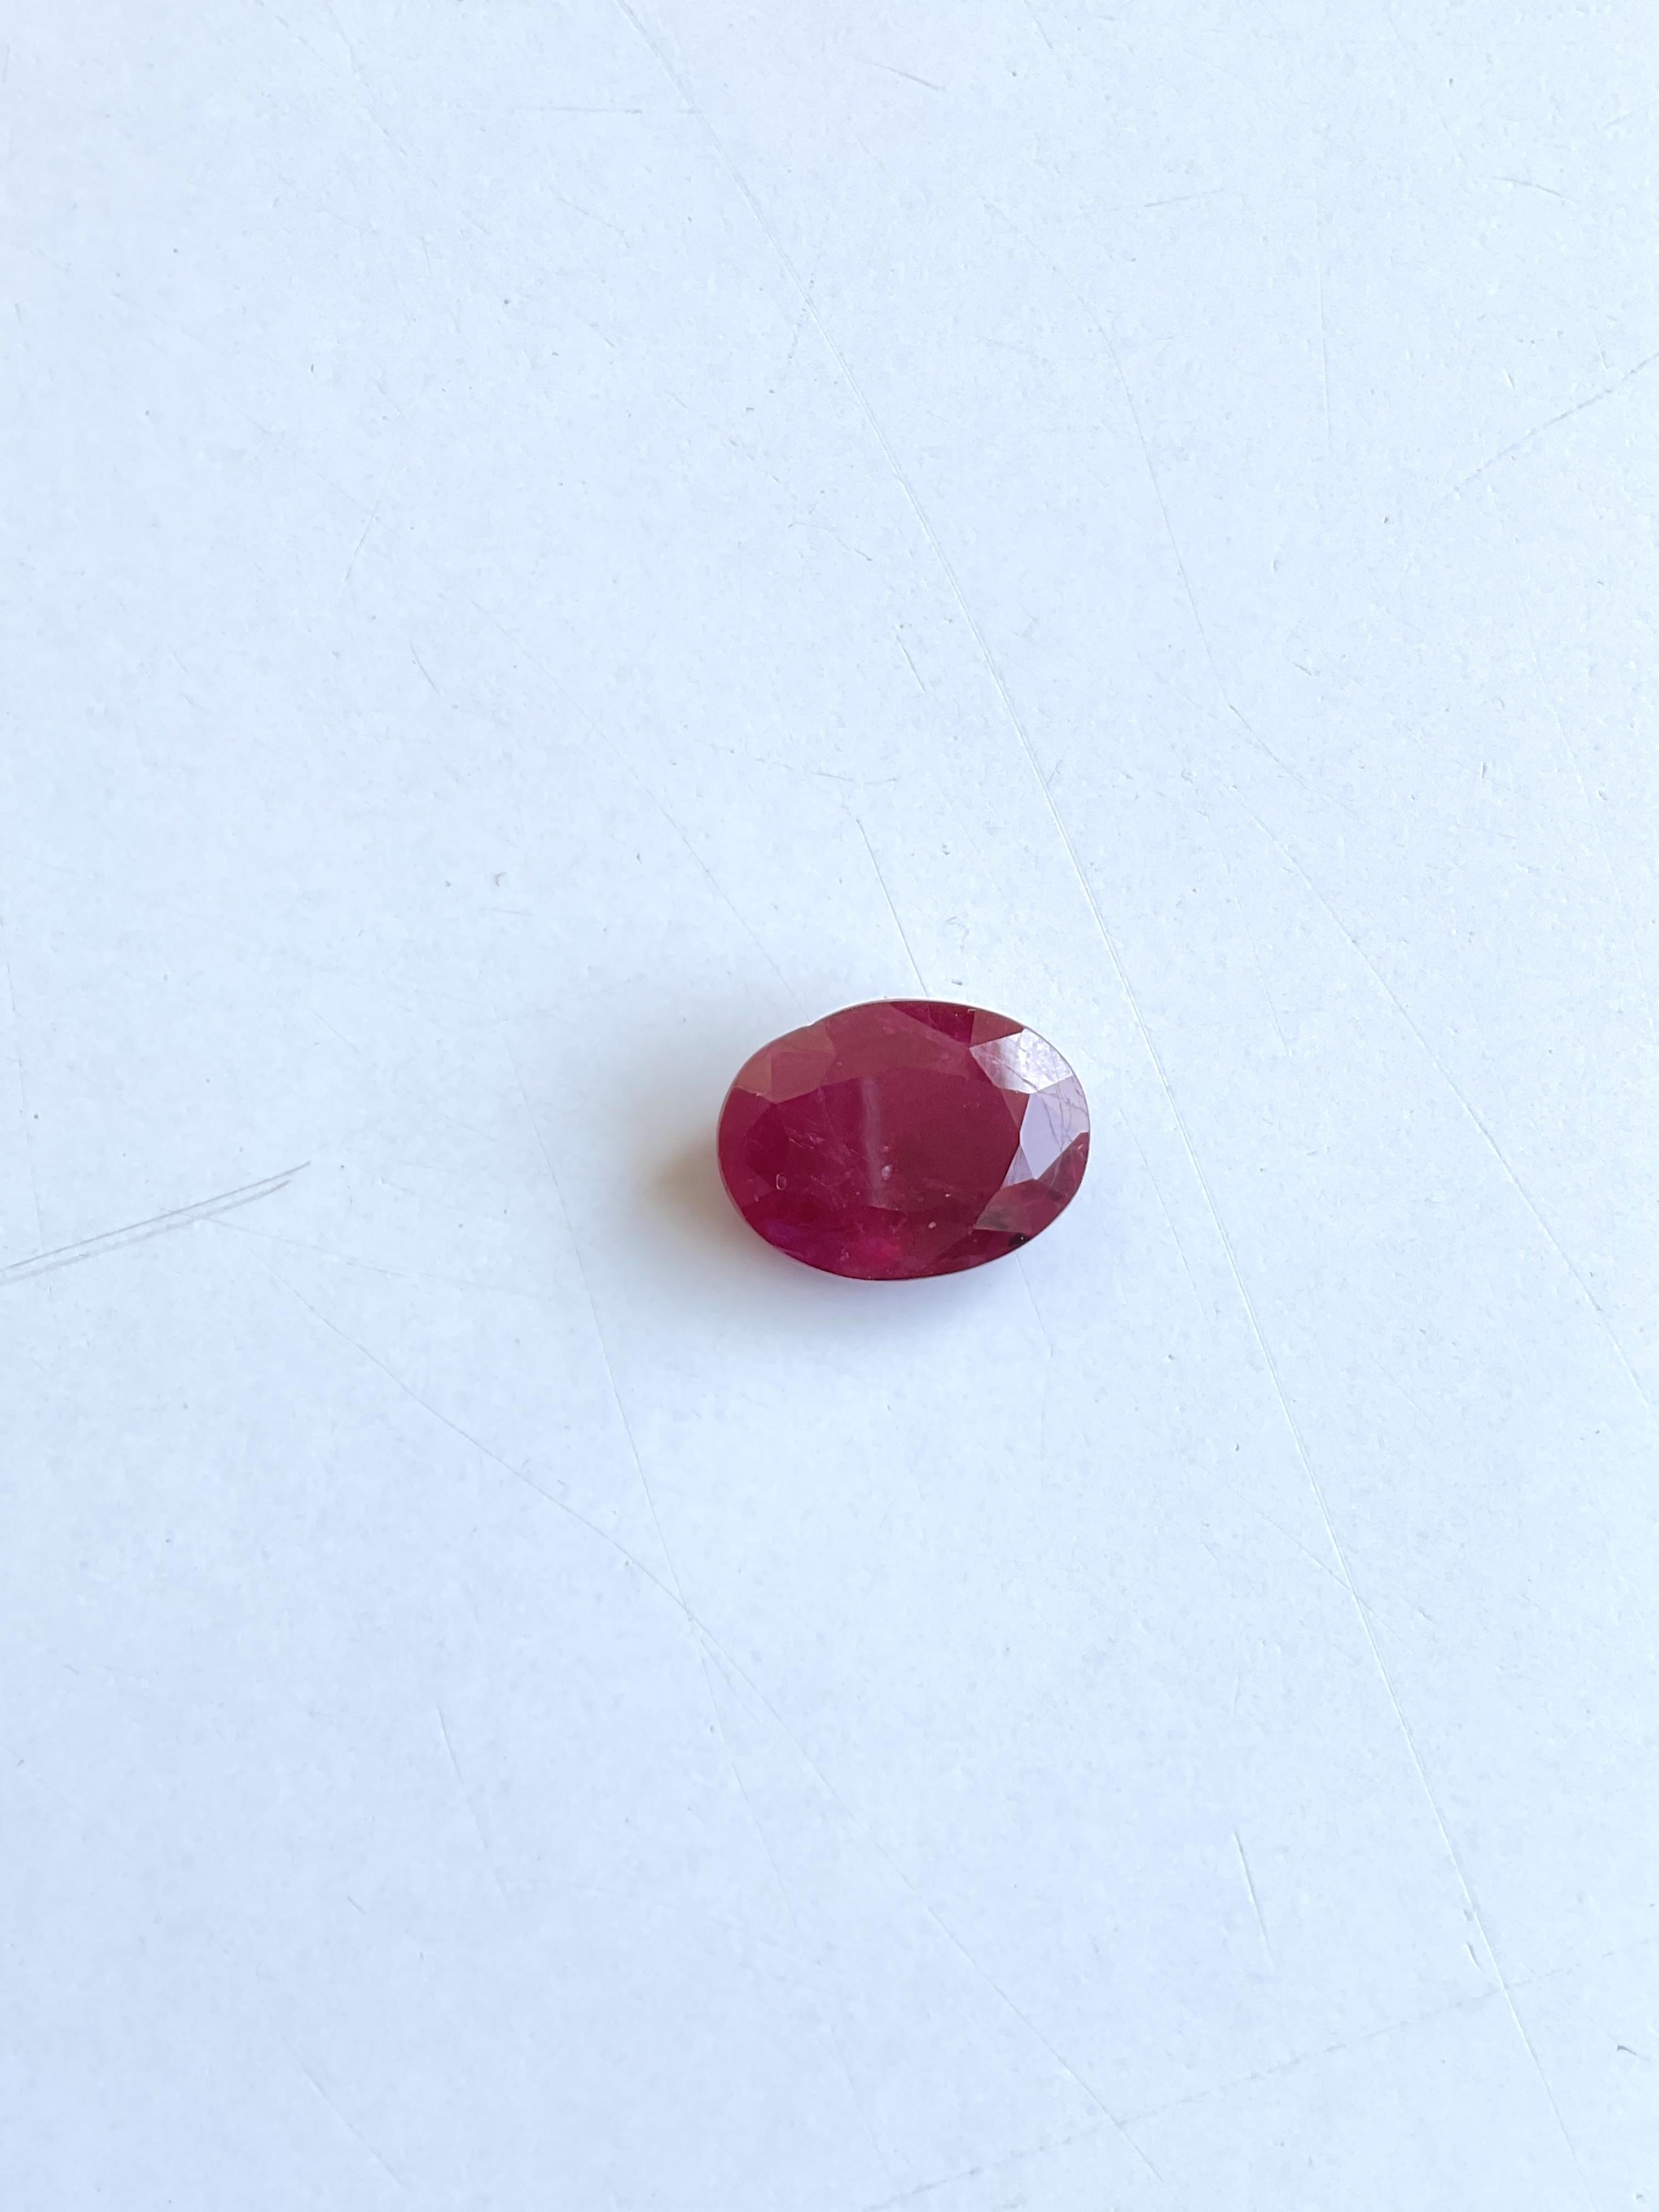 8.71 Carats Burmese No-Heat Ruby Natural Oval Cut Stone For Top Fine Jewelry Gem For Sale 3